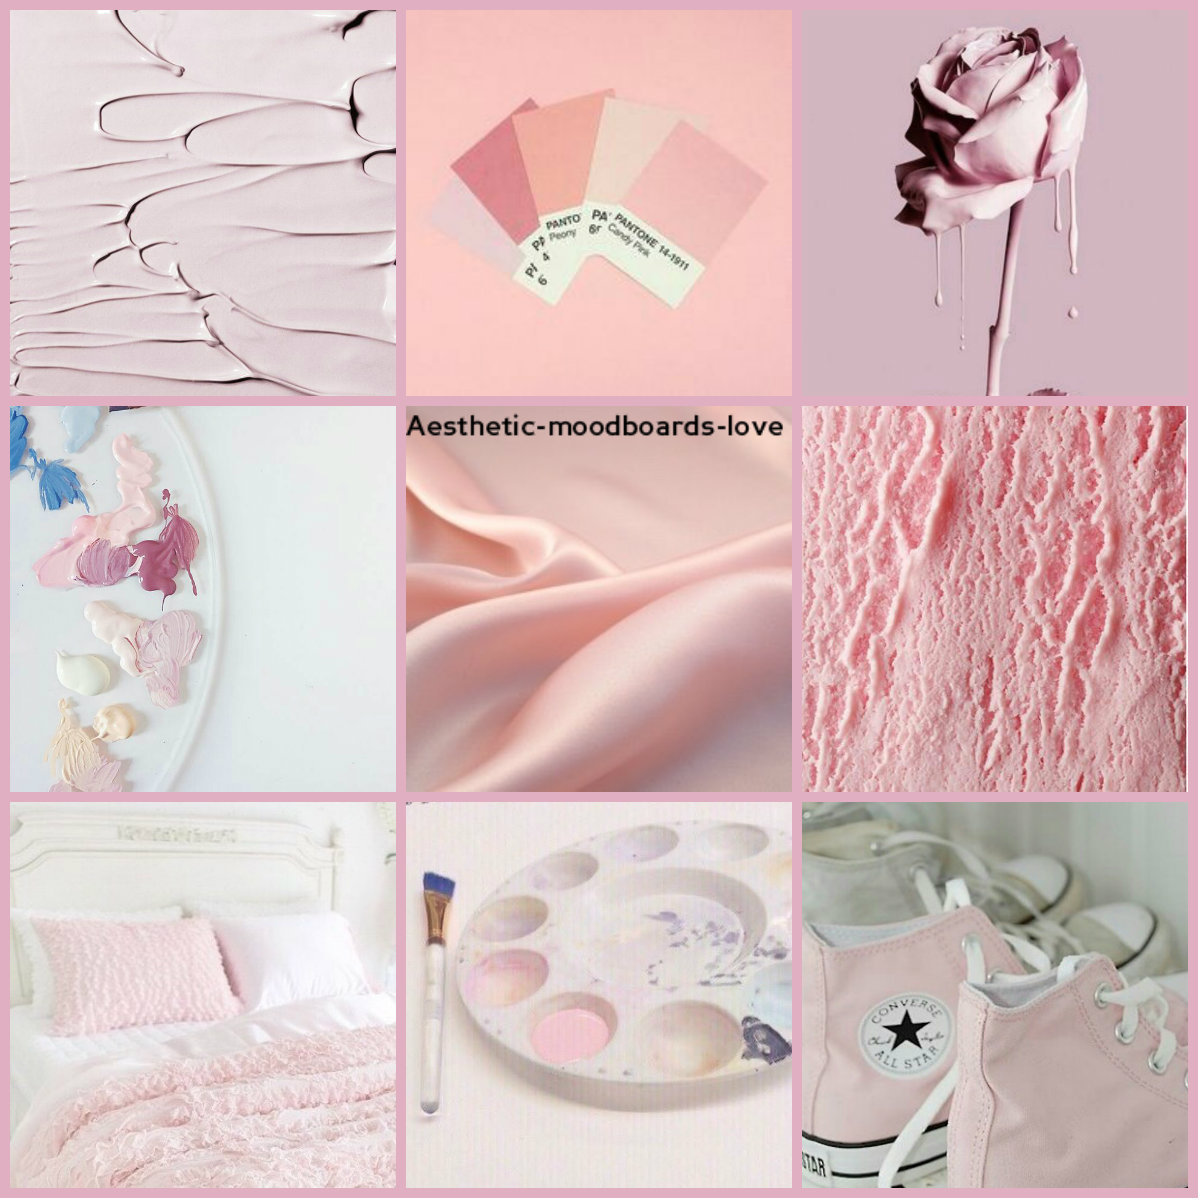 Aesthetics Moodboards Name Sophia Loves Art Requested By Anon Hope